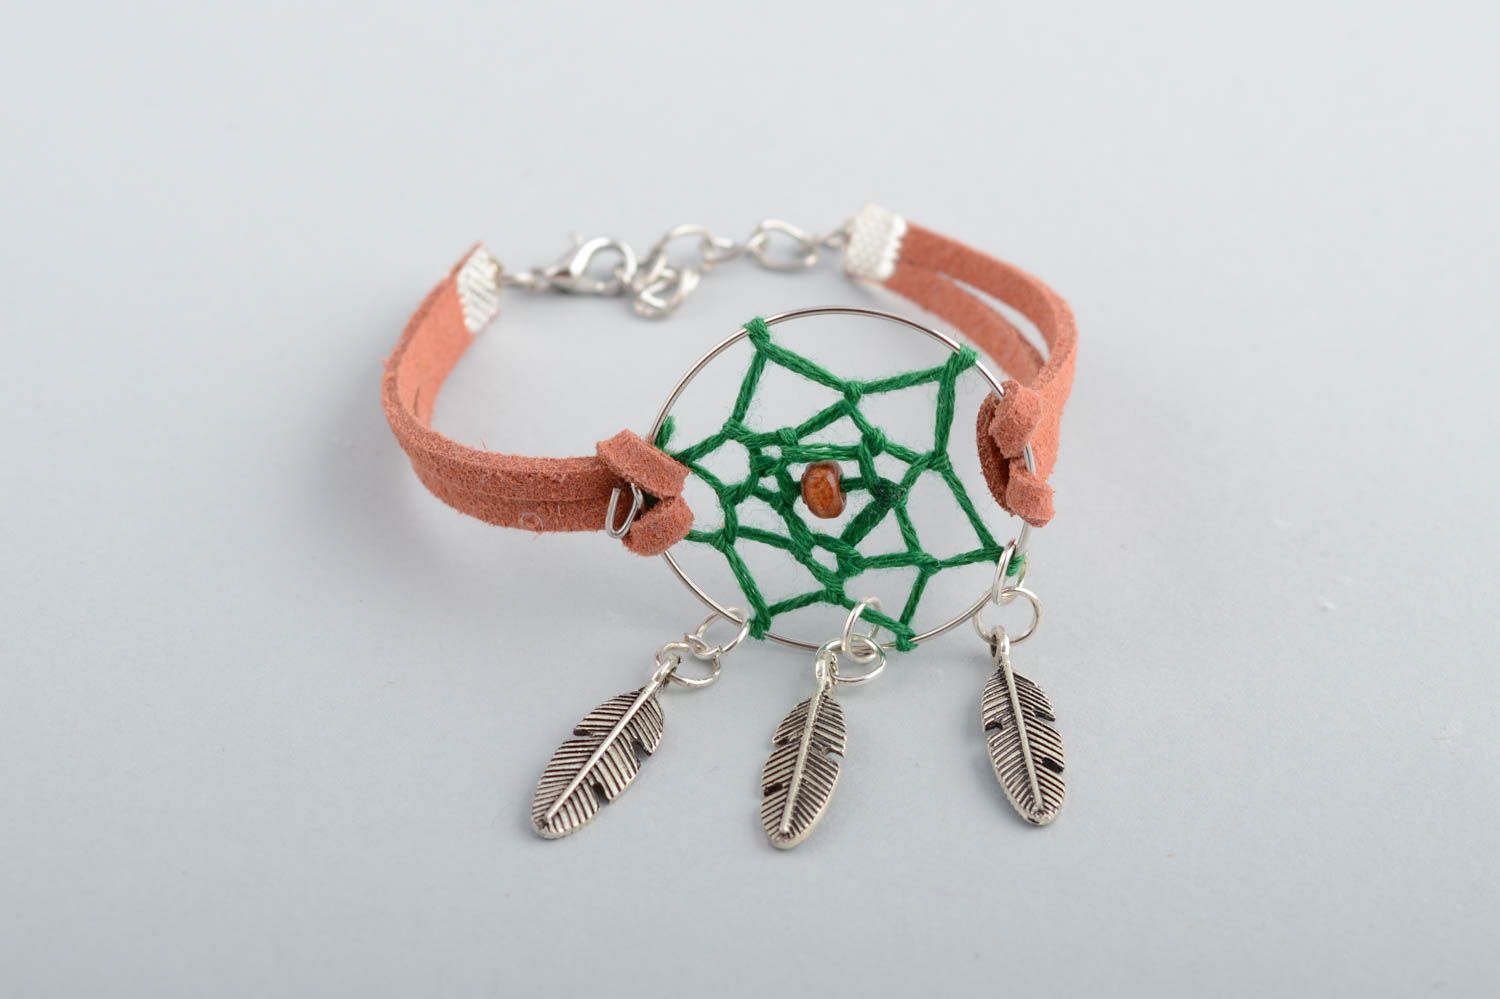 Handmade talisman bracelet with charms in shape of feathers Dreamcatcher photo 3